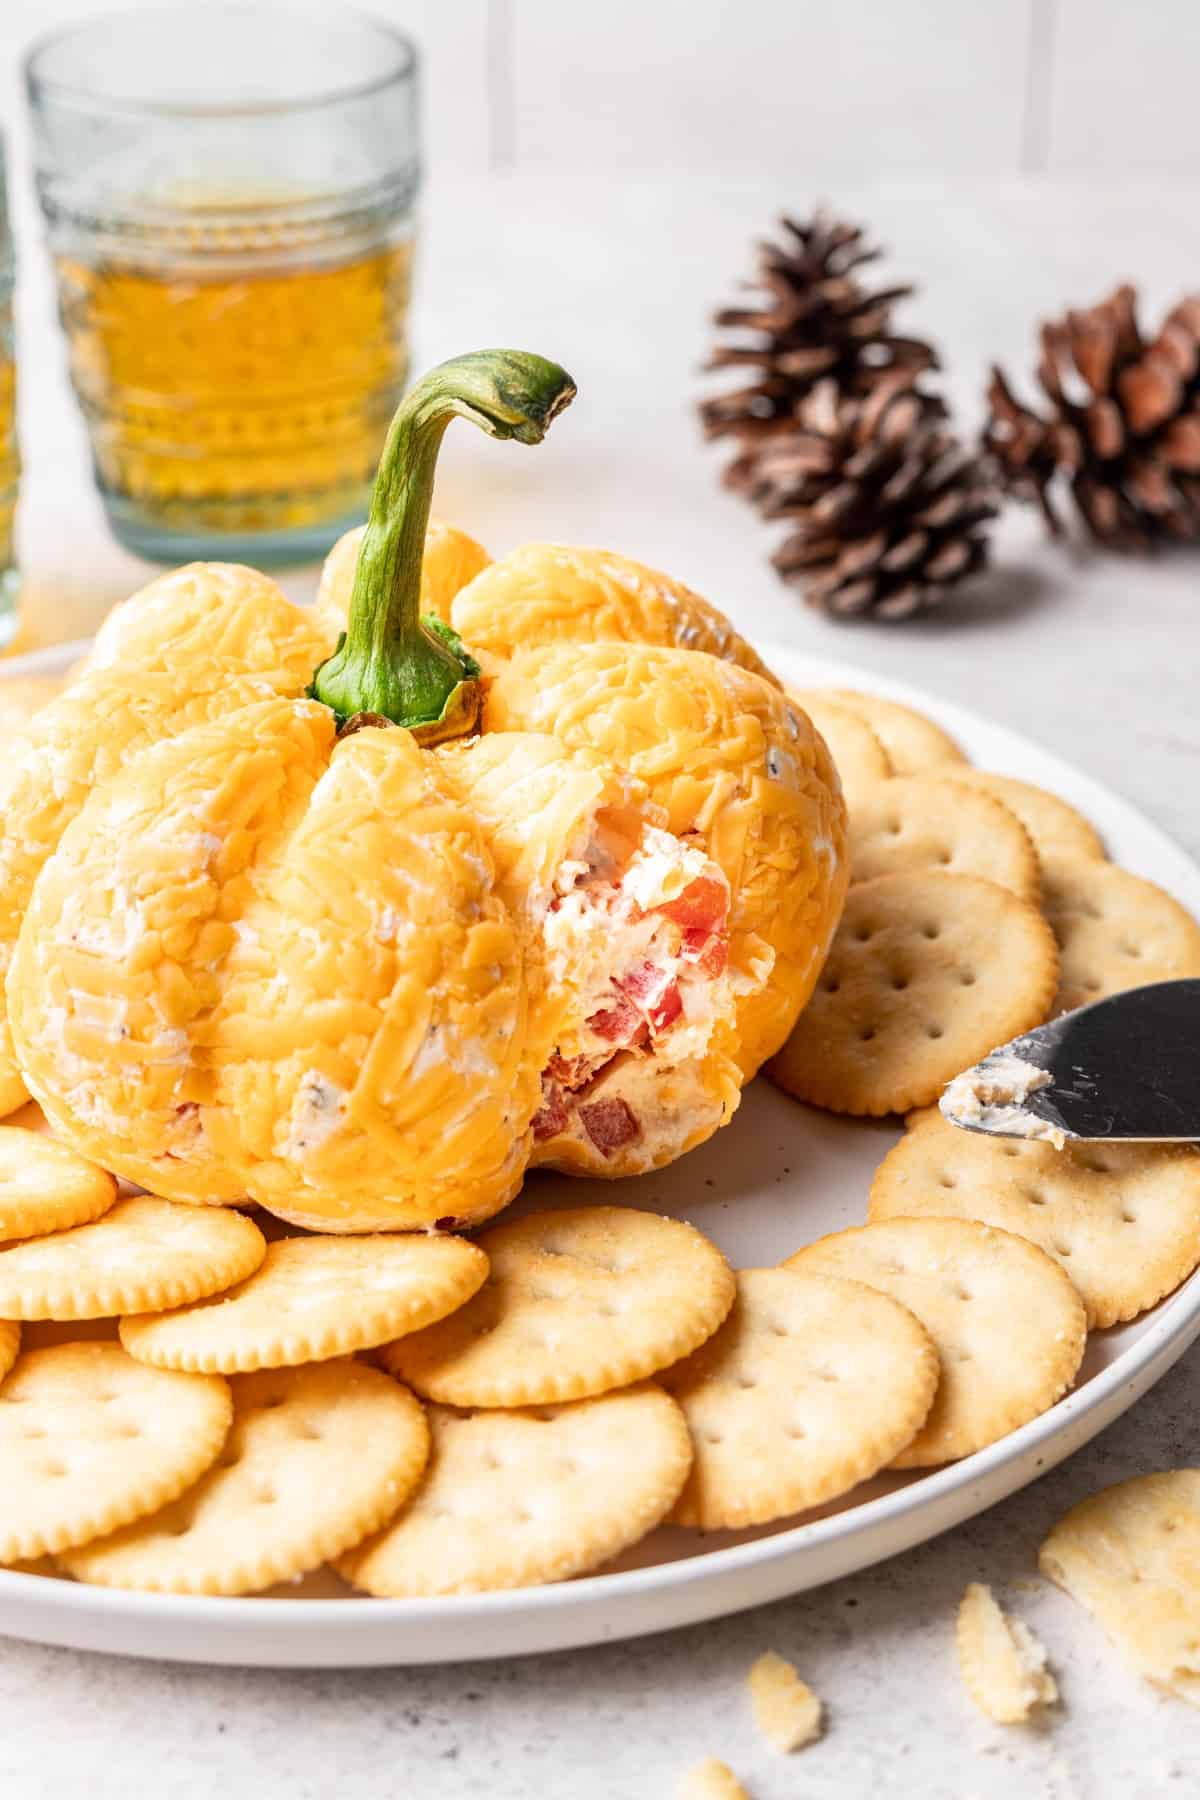 A pumpkin cheese ball on a serving platter with some missing to show the inside.